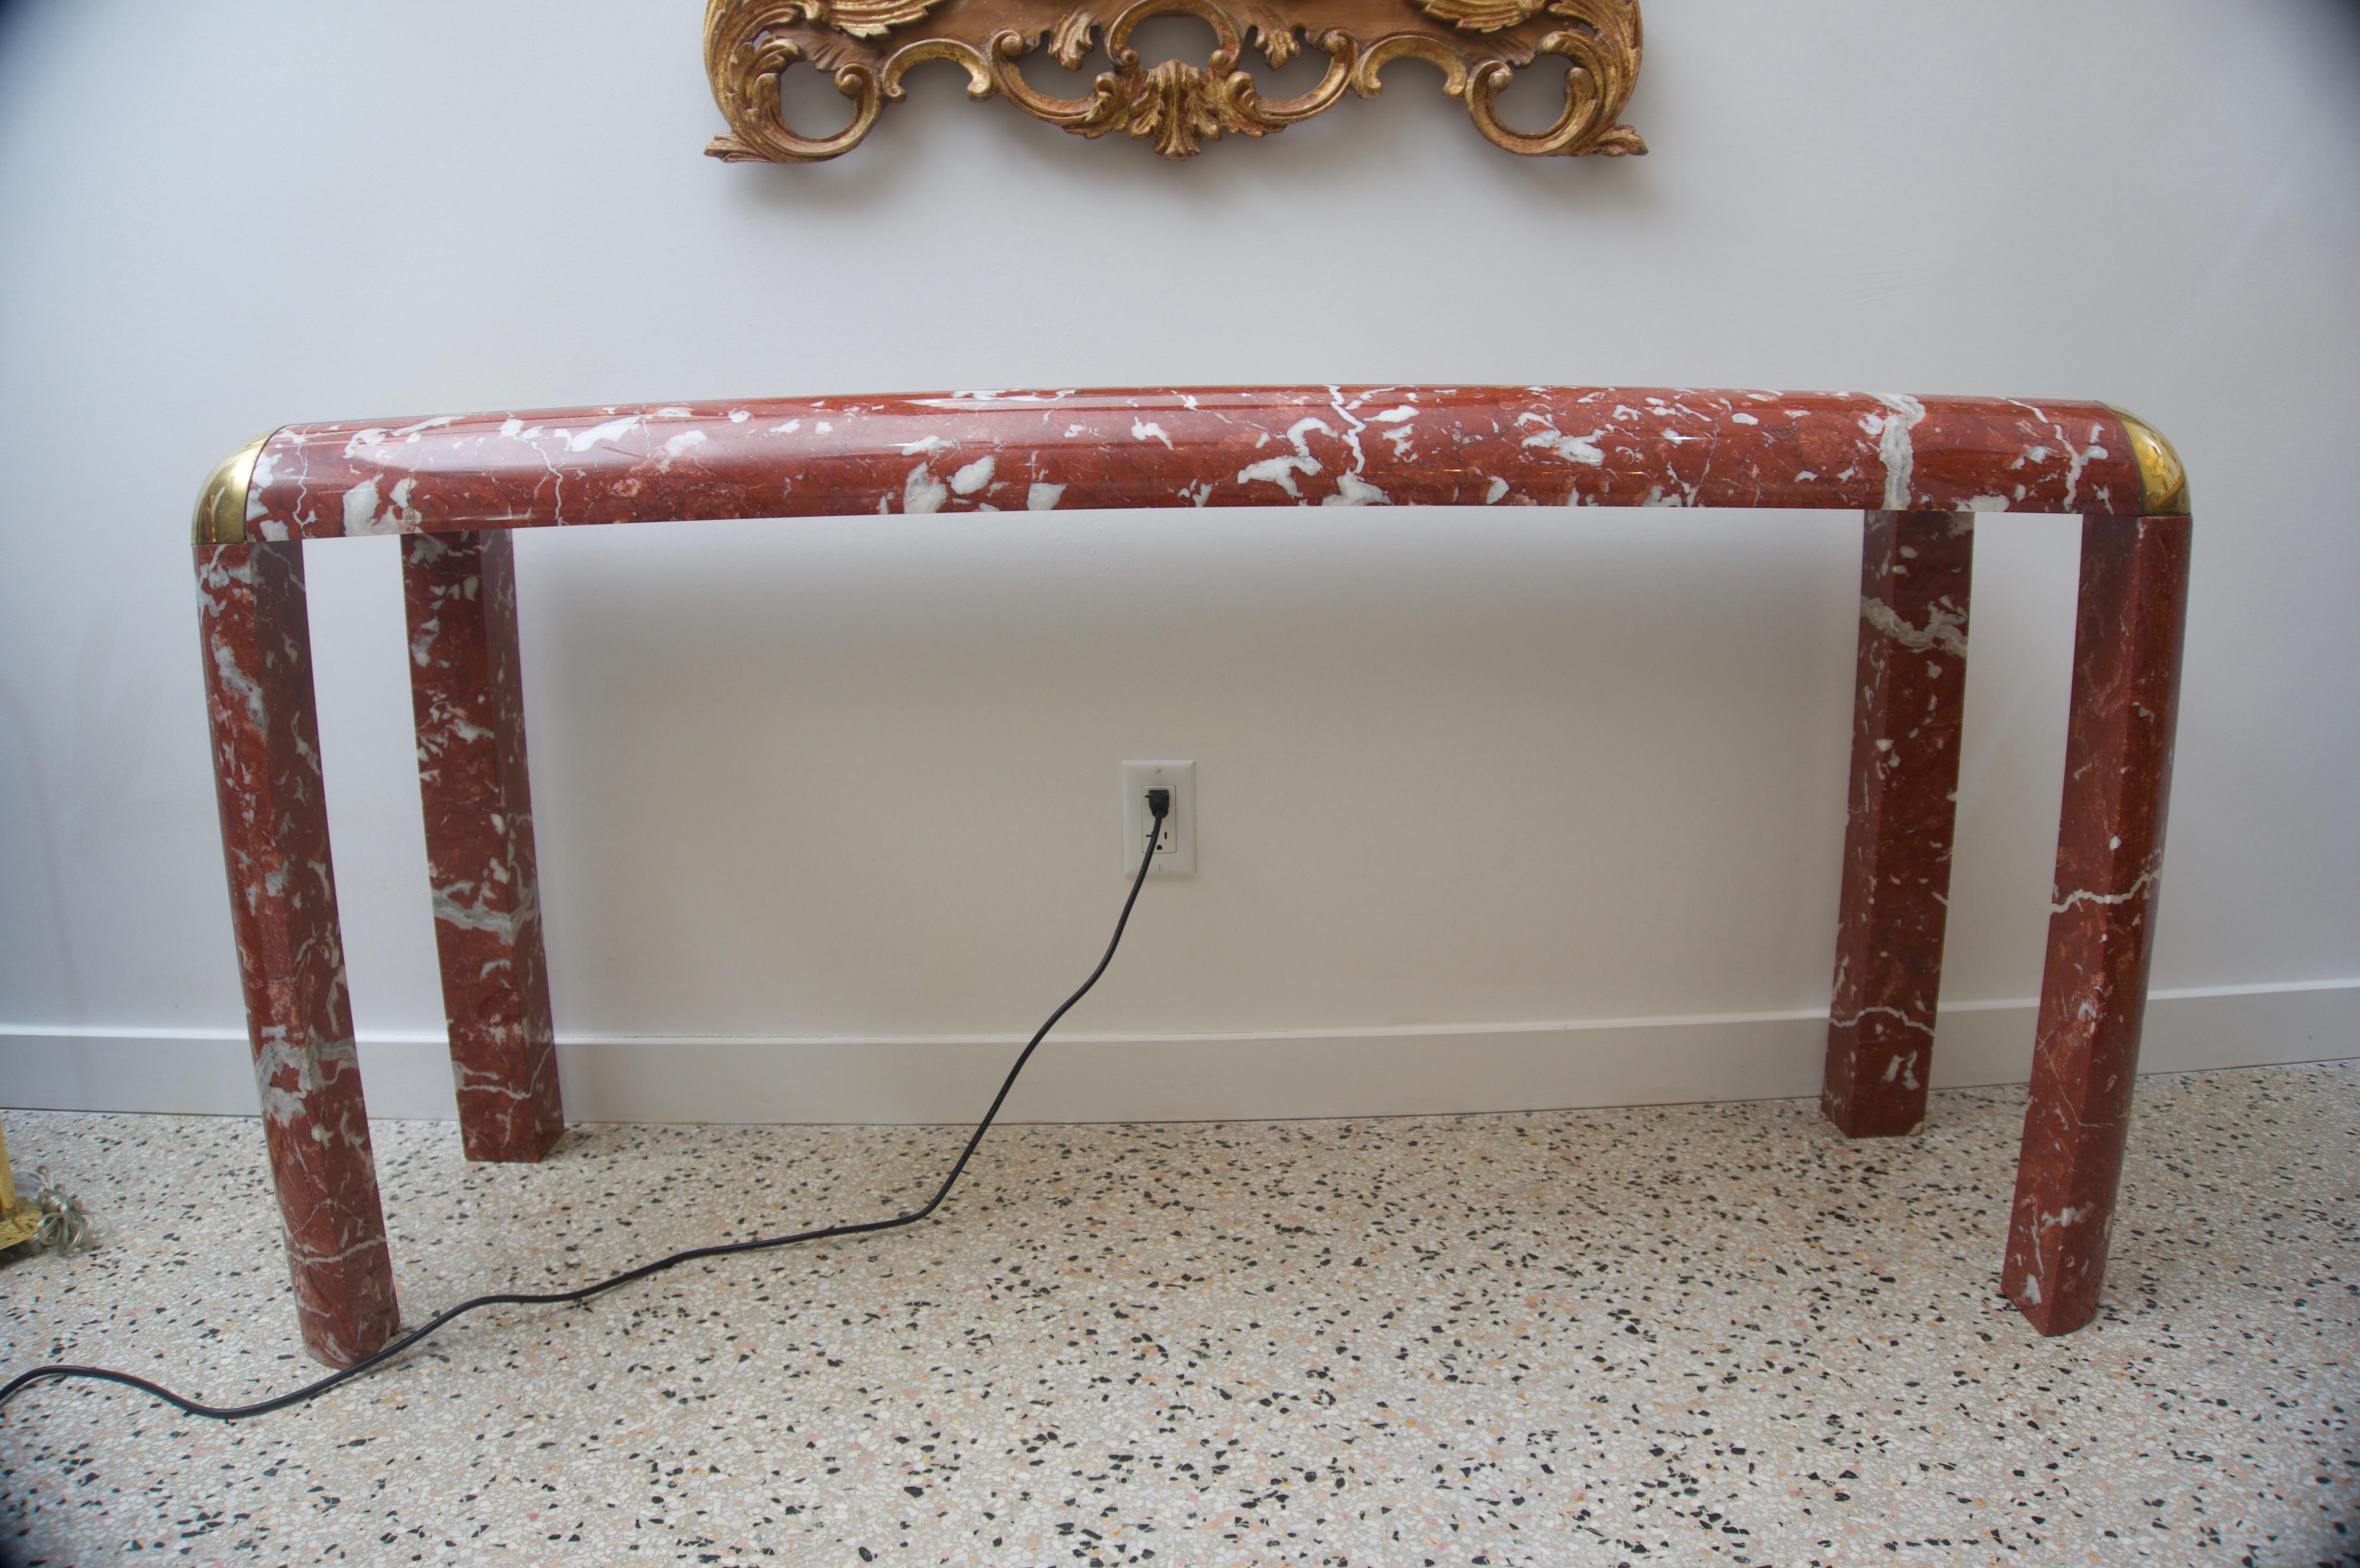 This stylish and chic breccia marble console table dates to the 1980s and is very much in the manner of piece created by Karl Springer. The piece was acquired from a Palm Beach estate and it will make a strong statement with its bold lines and use